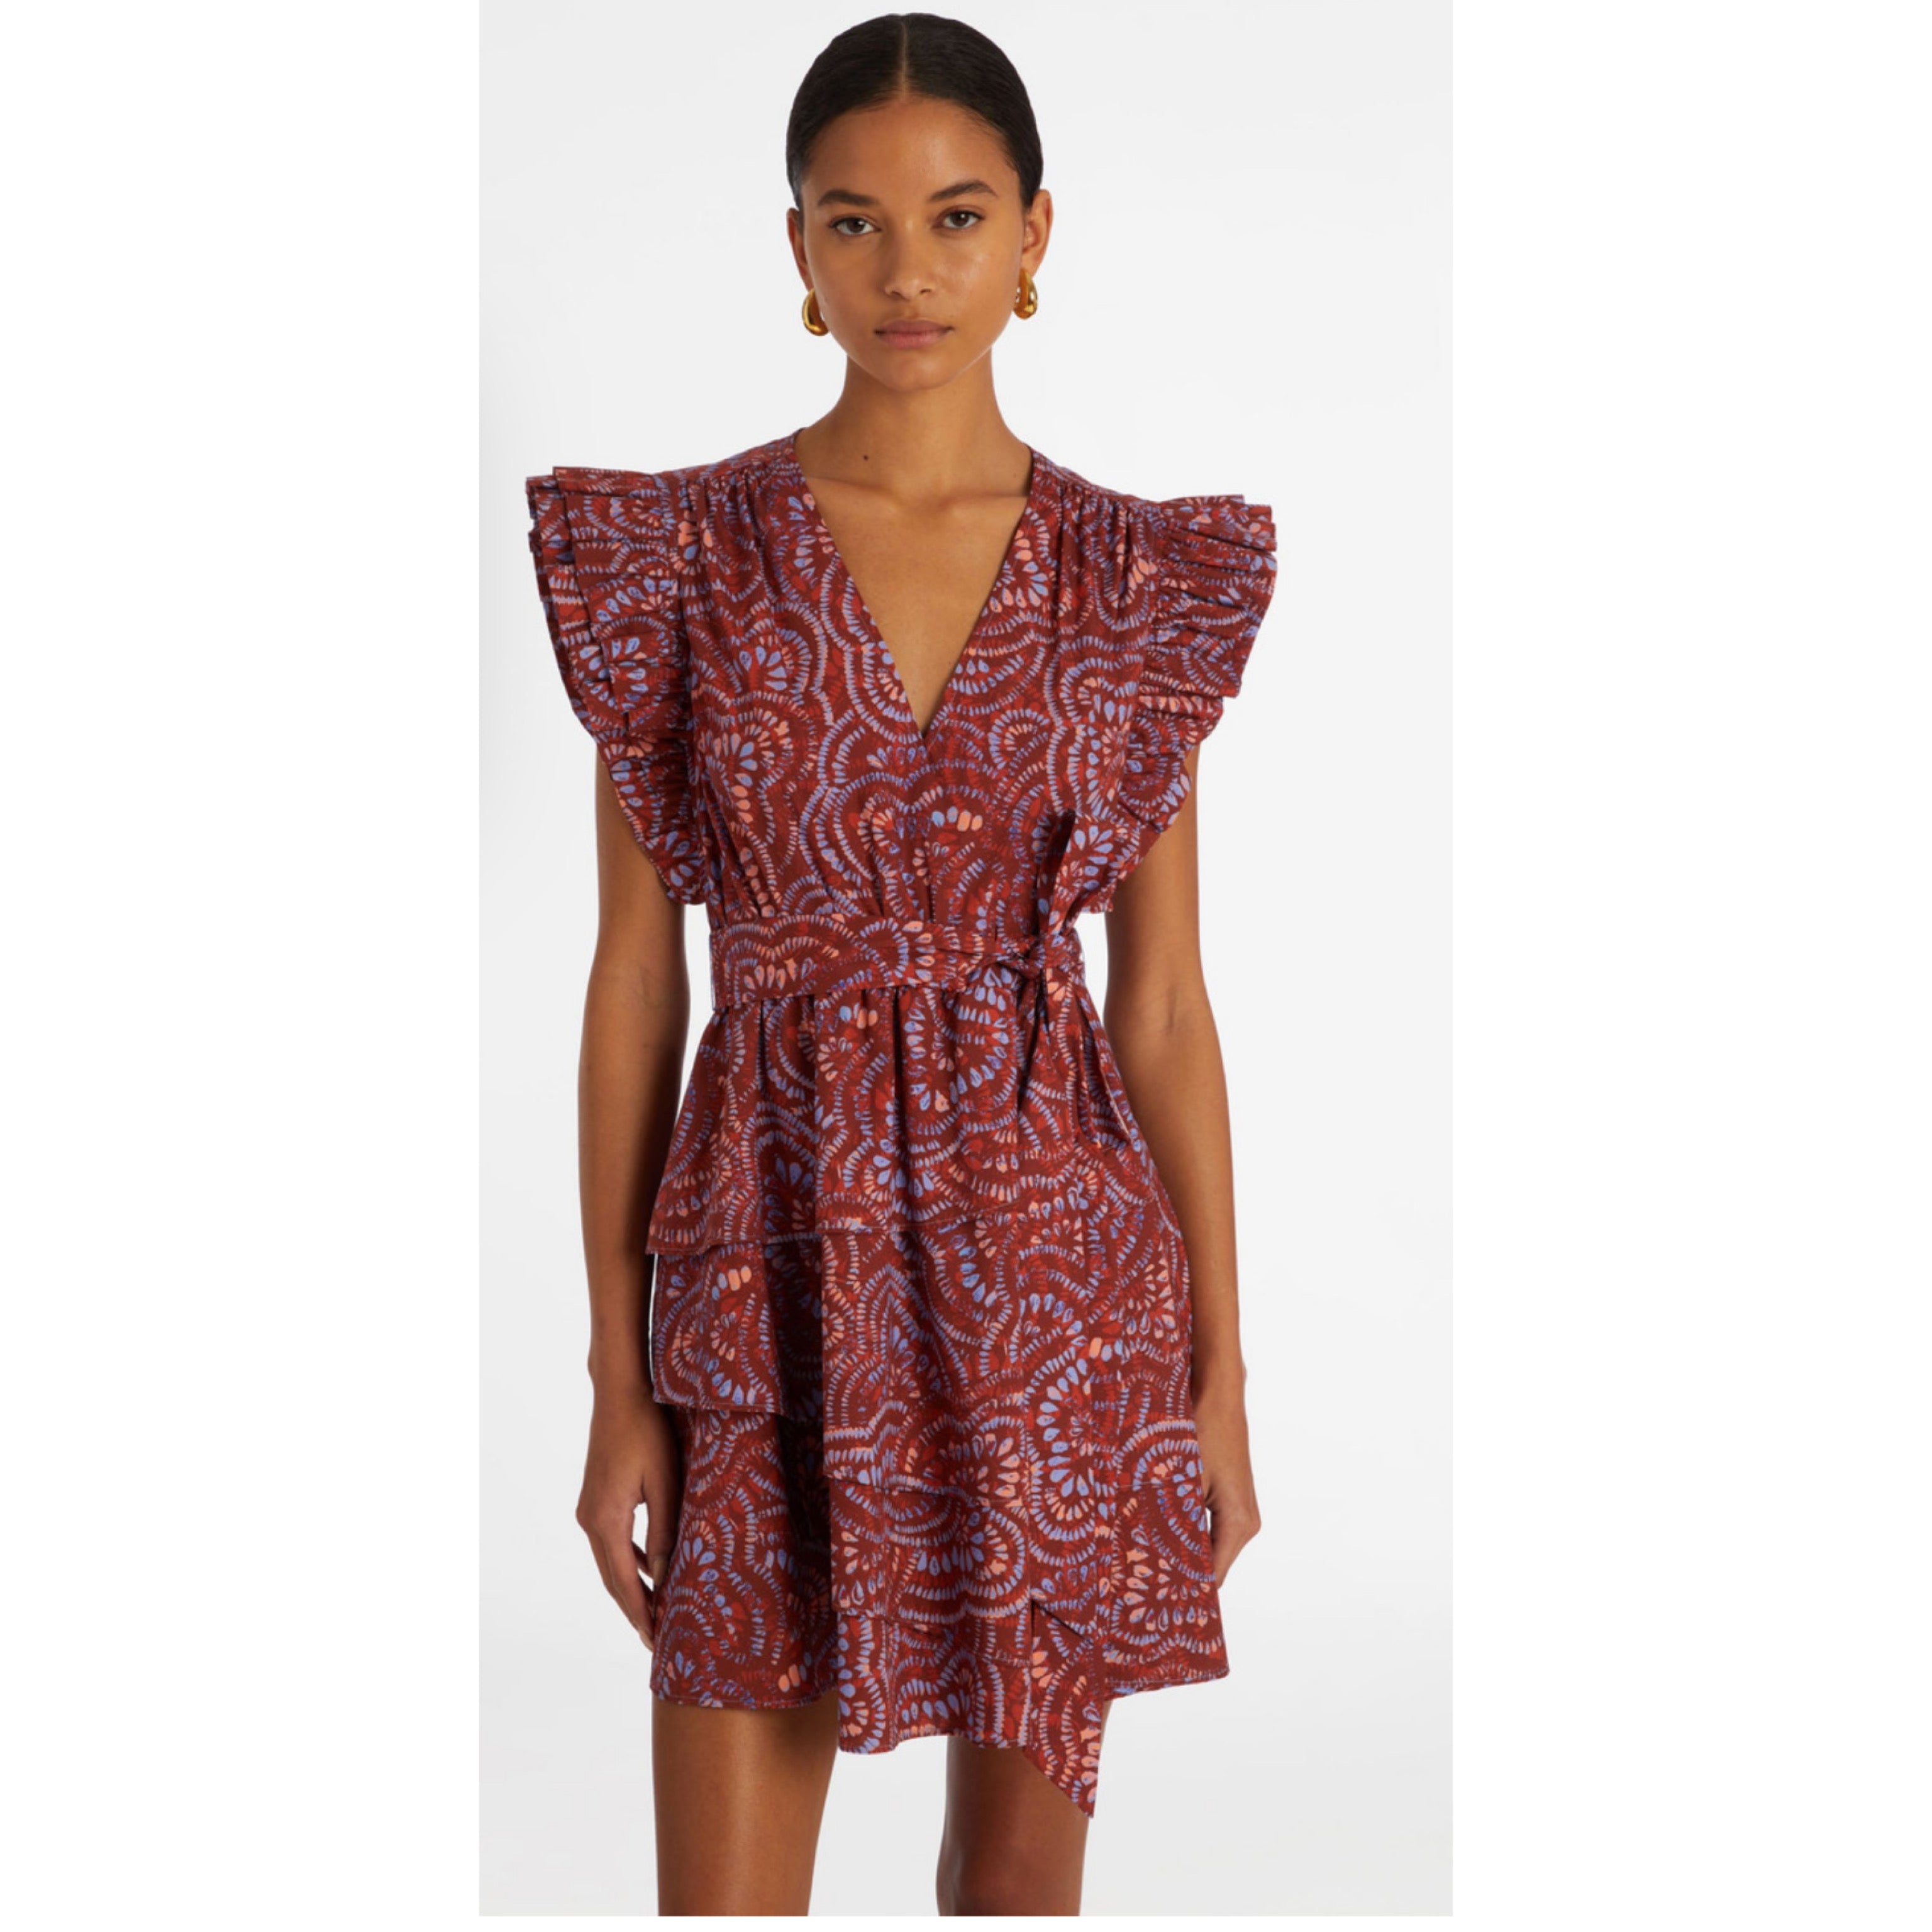 Marie Oliver rust print dress, size S